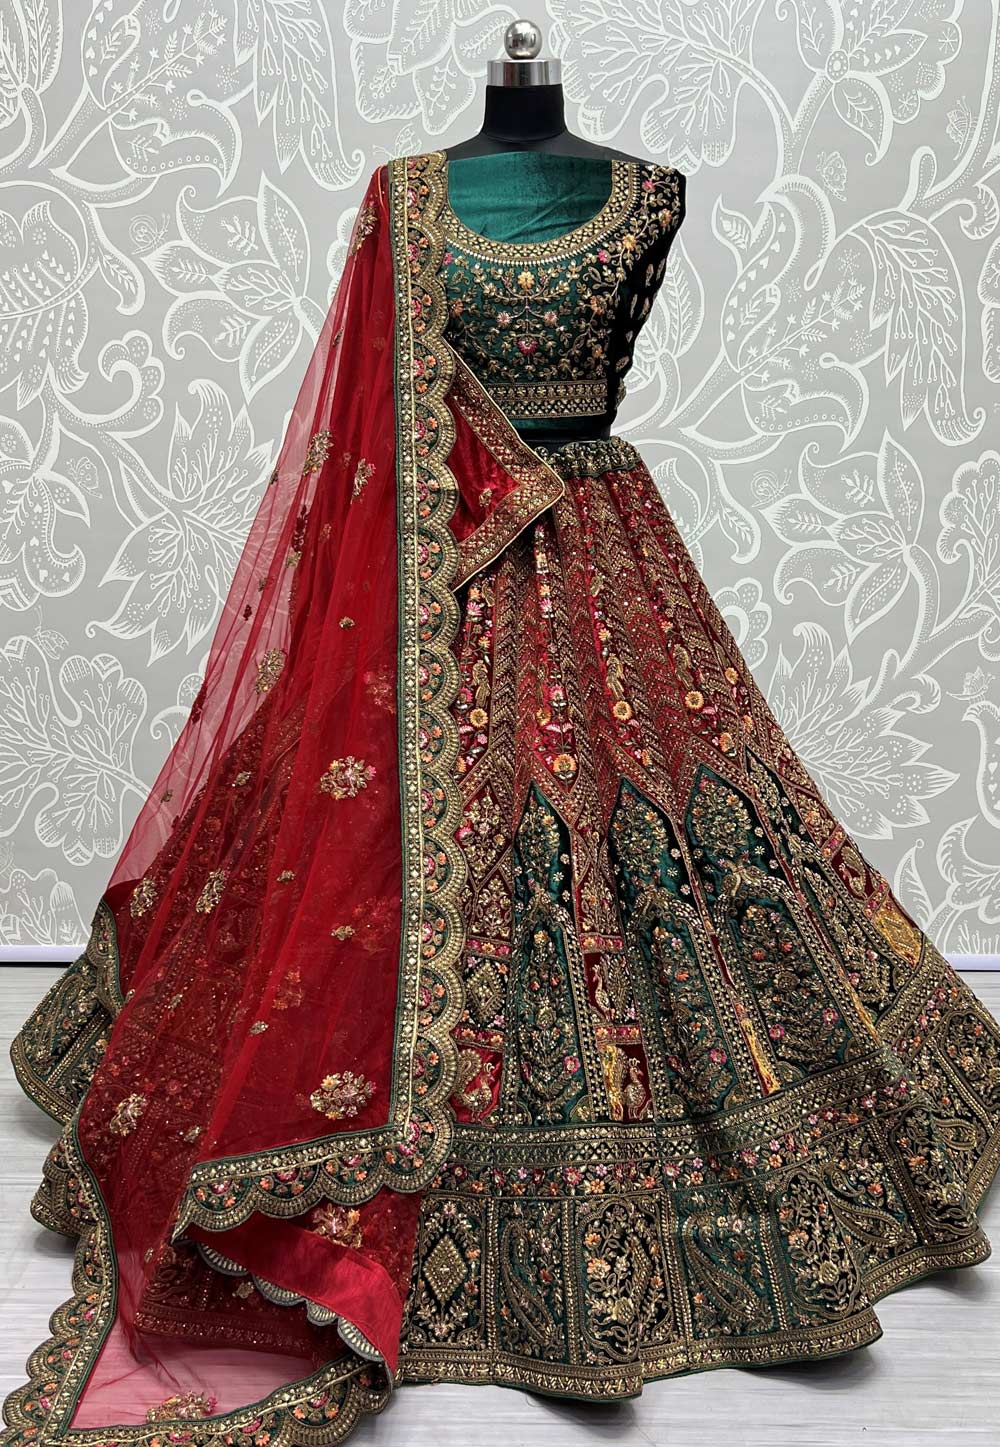 Sabyasachi Bride Wore A Fully Embroidered Sea-Green 'Lehenga' Breaking  Barriers Of The Red Look